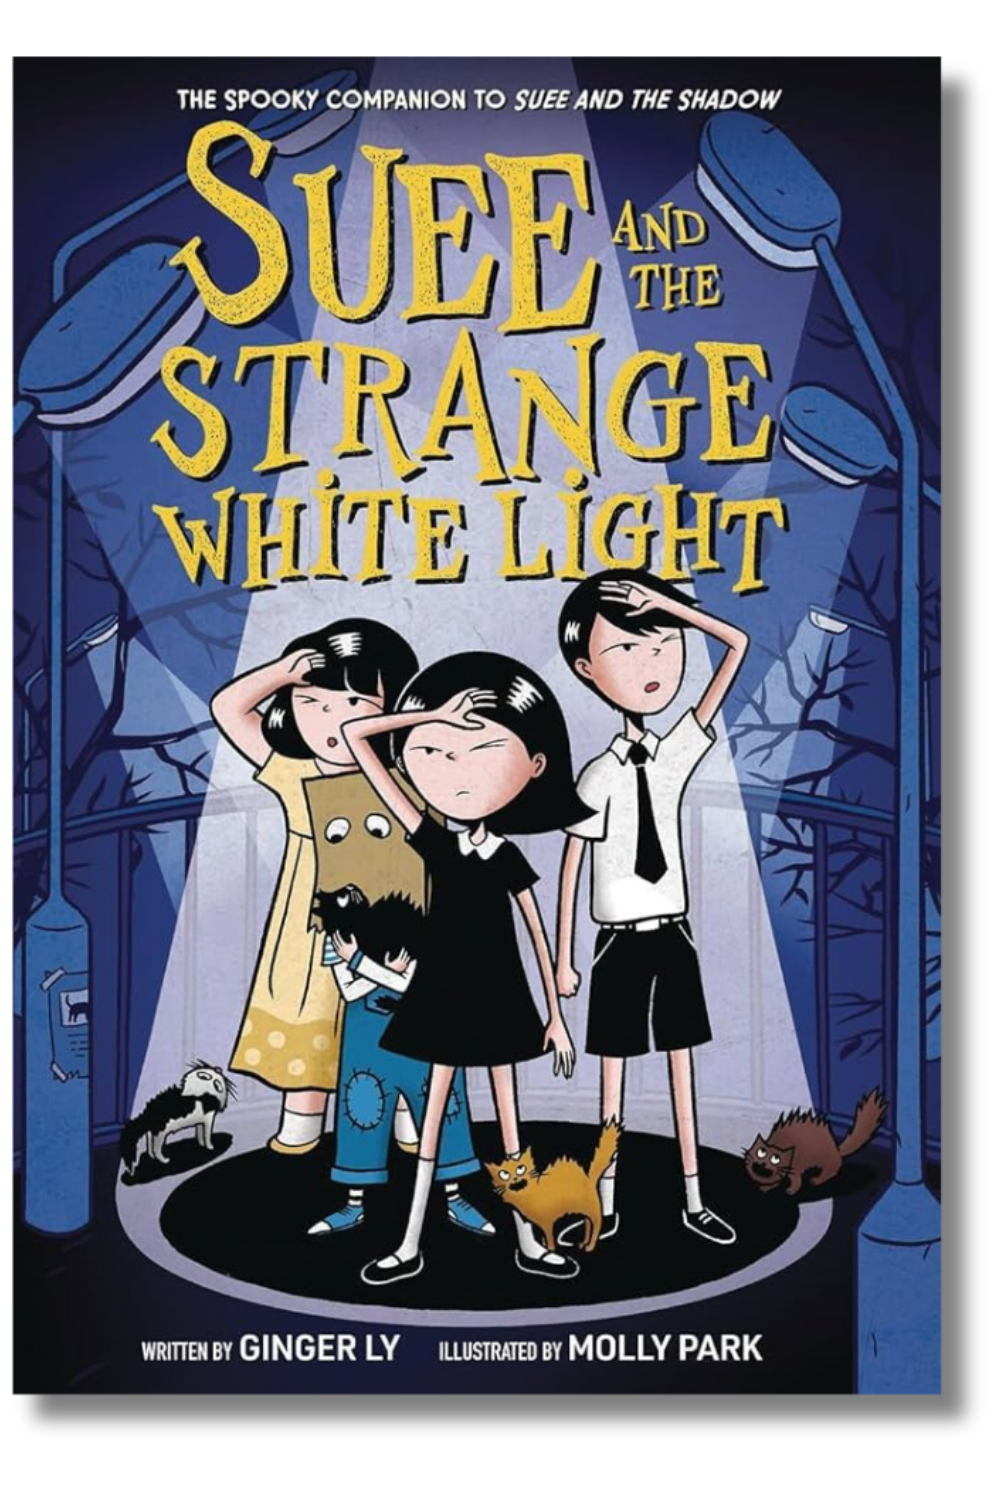 The cover of "Suee and the Strange White Light" by Ginger Ly